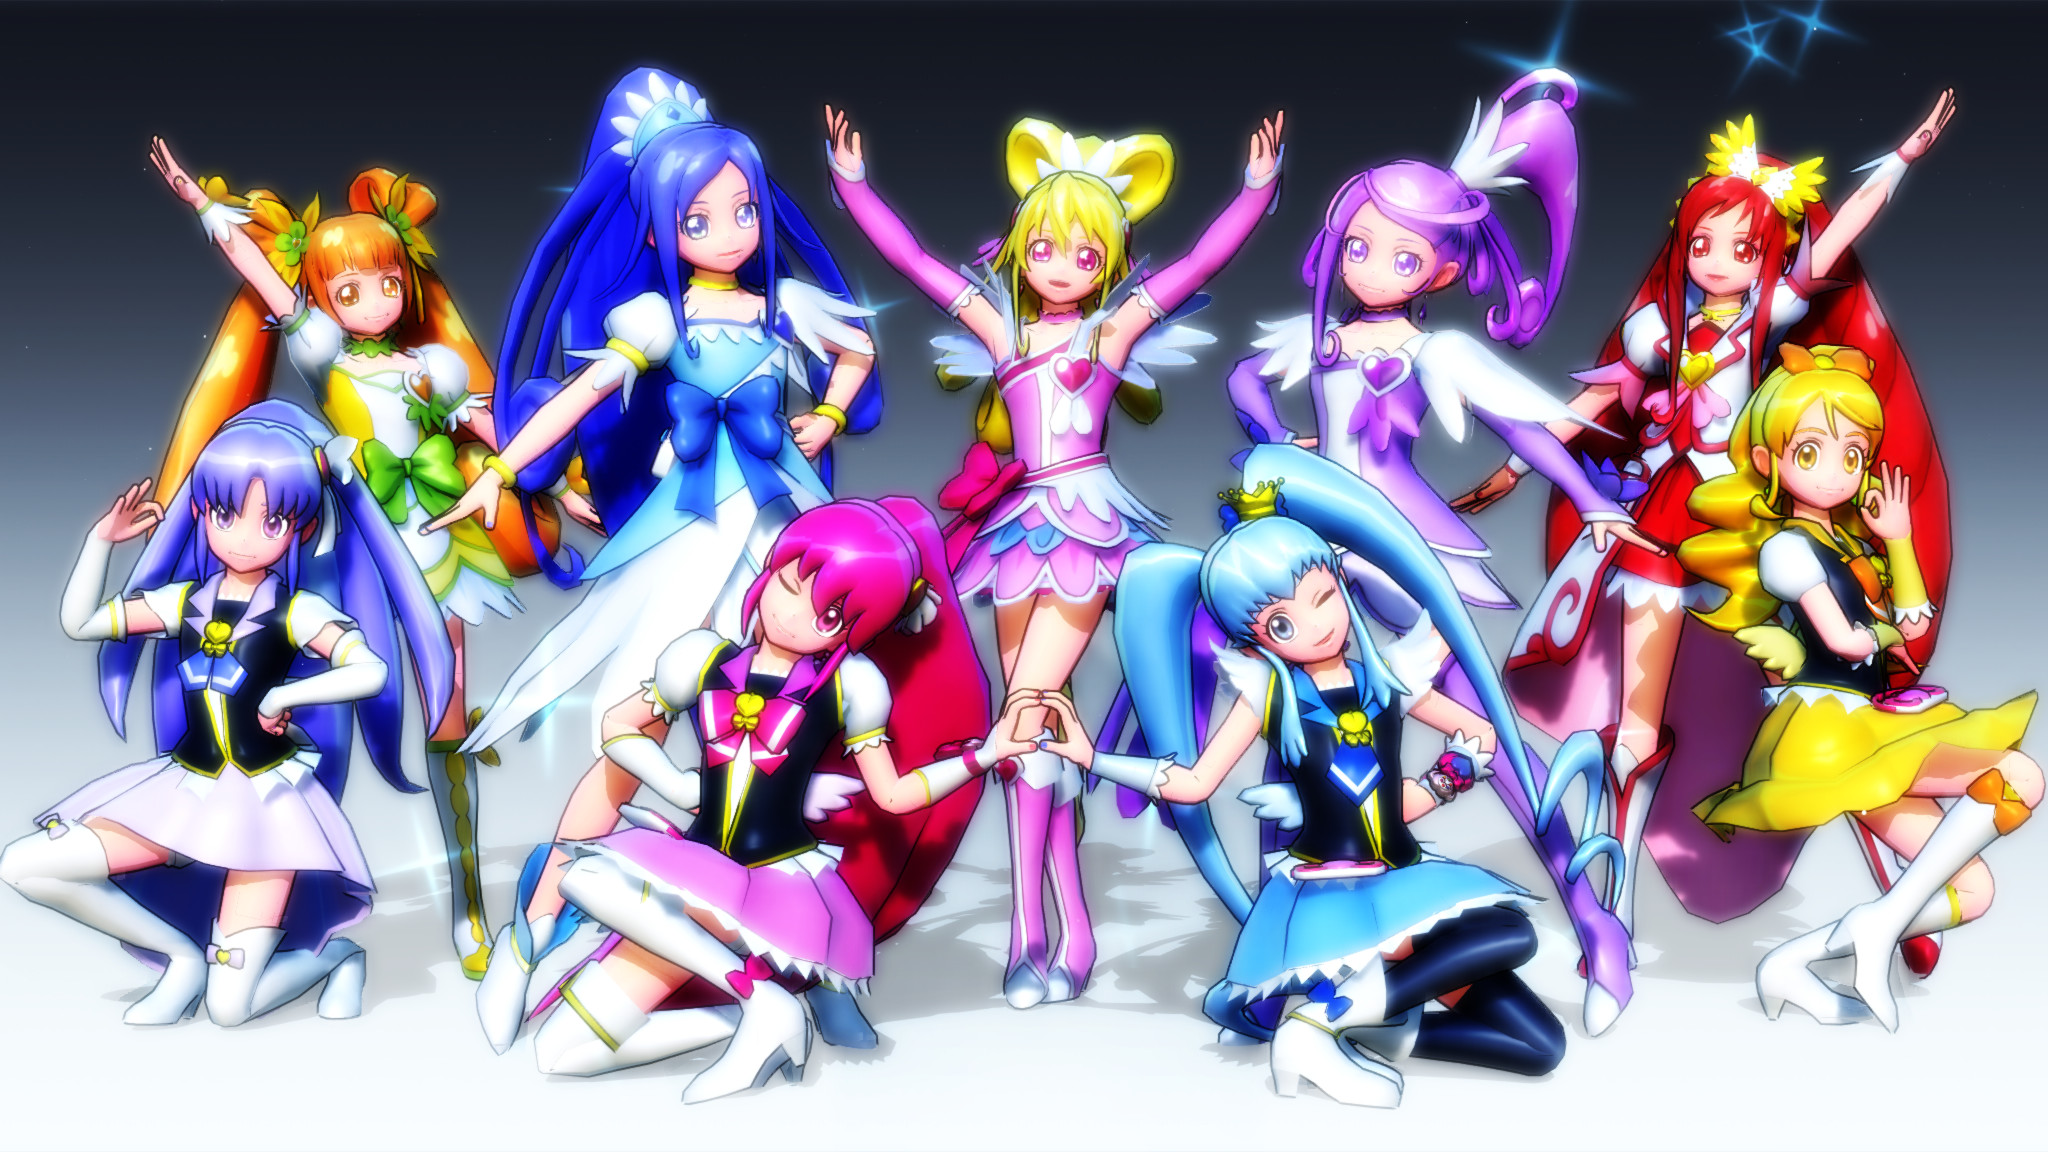 2048x1152 Precure - HappinessCharge Precure! by Lucky3Seven [MMD] DokiDoki! Precure -  HappinessCharge Precure! by Lucky3Seven